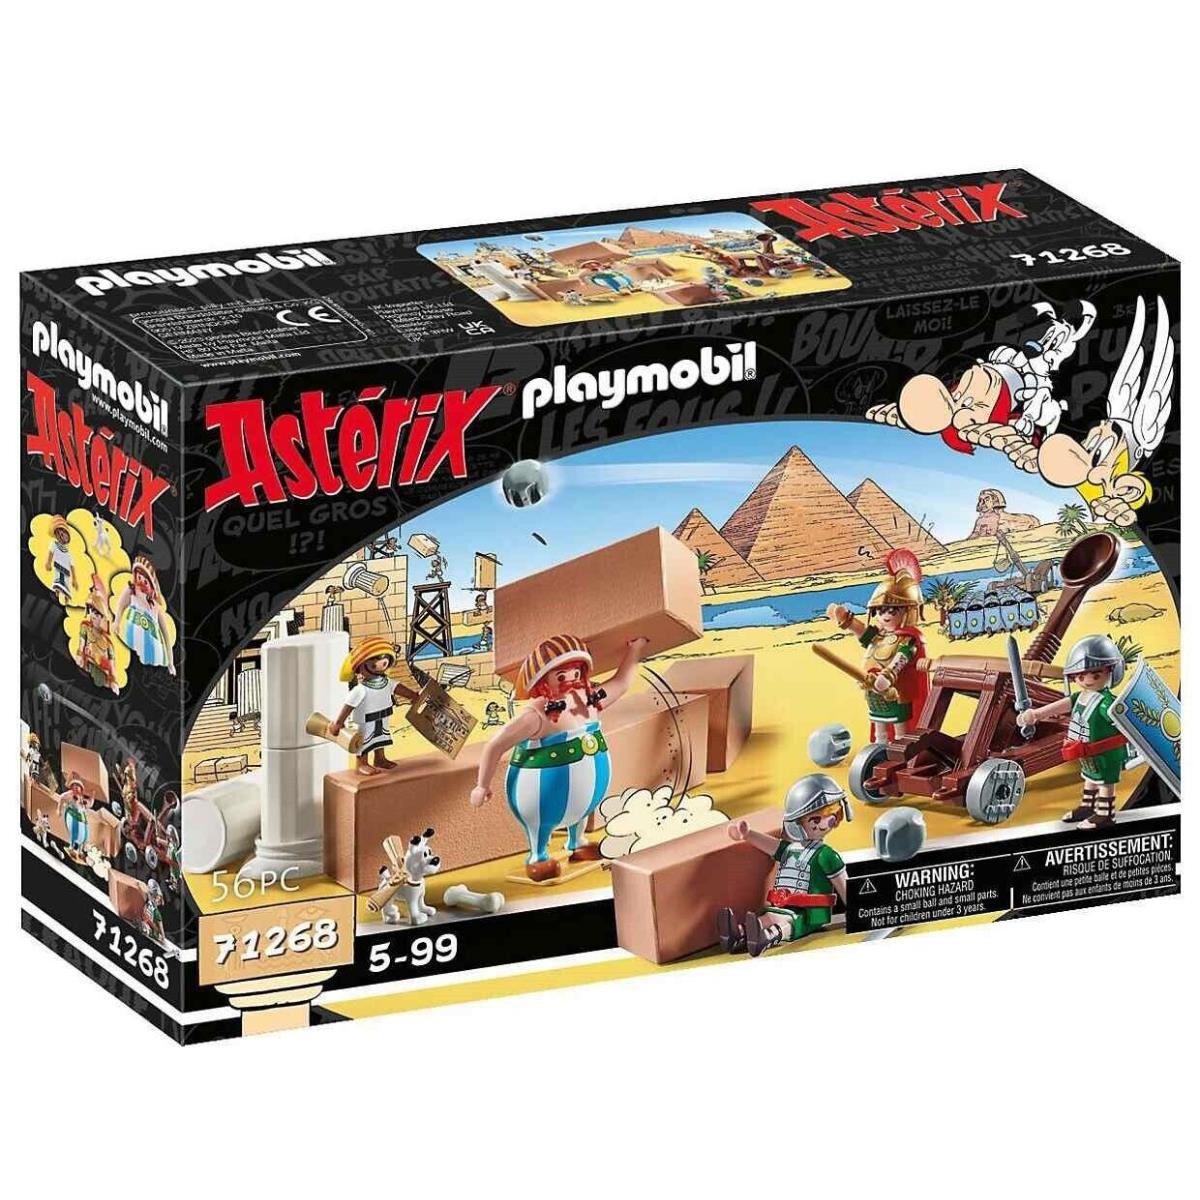 Playmobil 71268 Asterix: Edifis and The Battle of The Palace